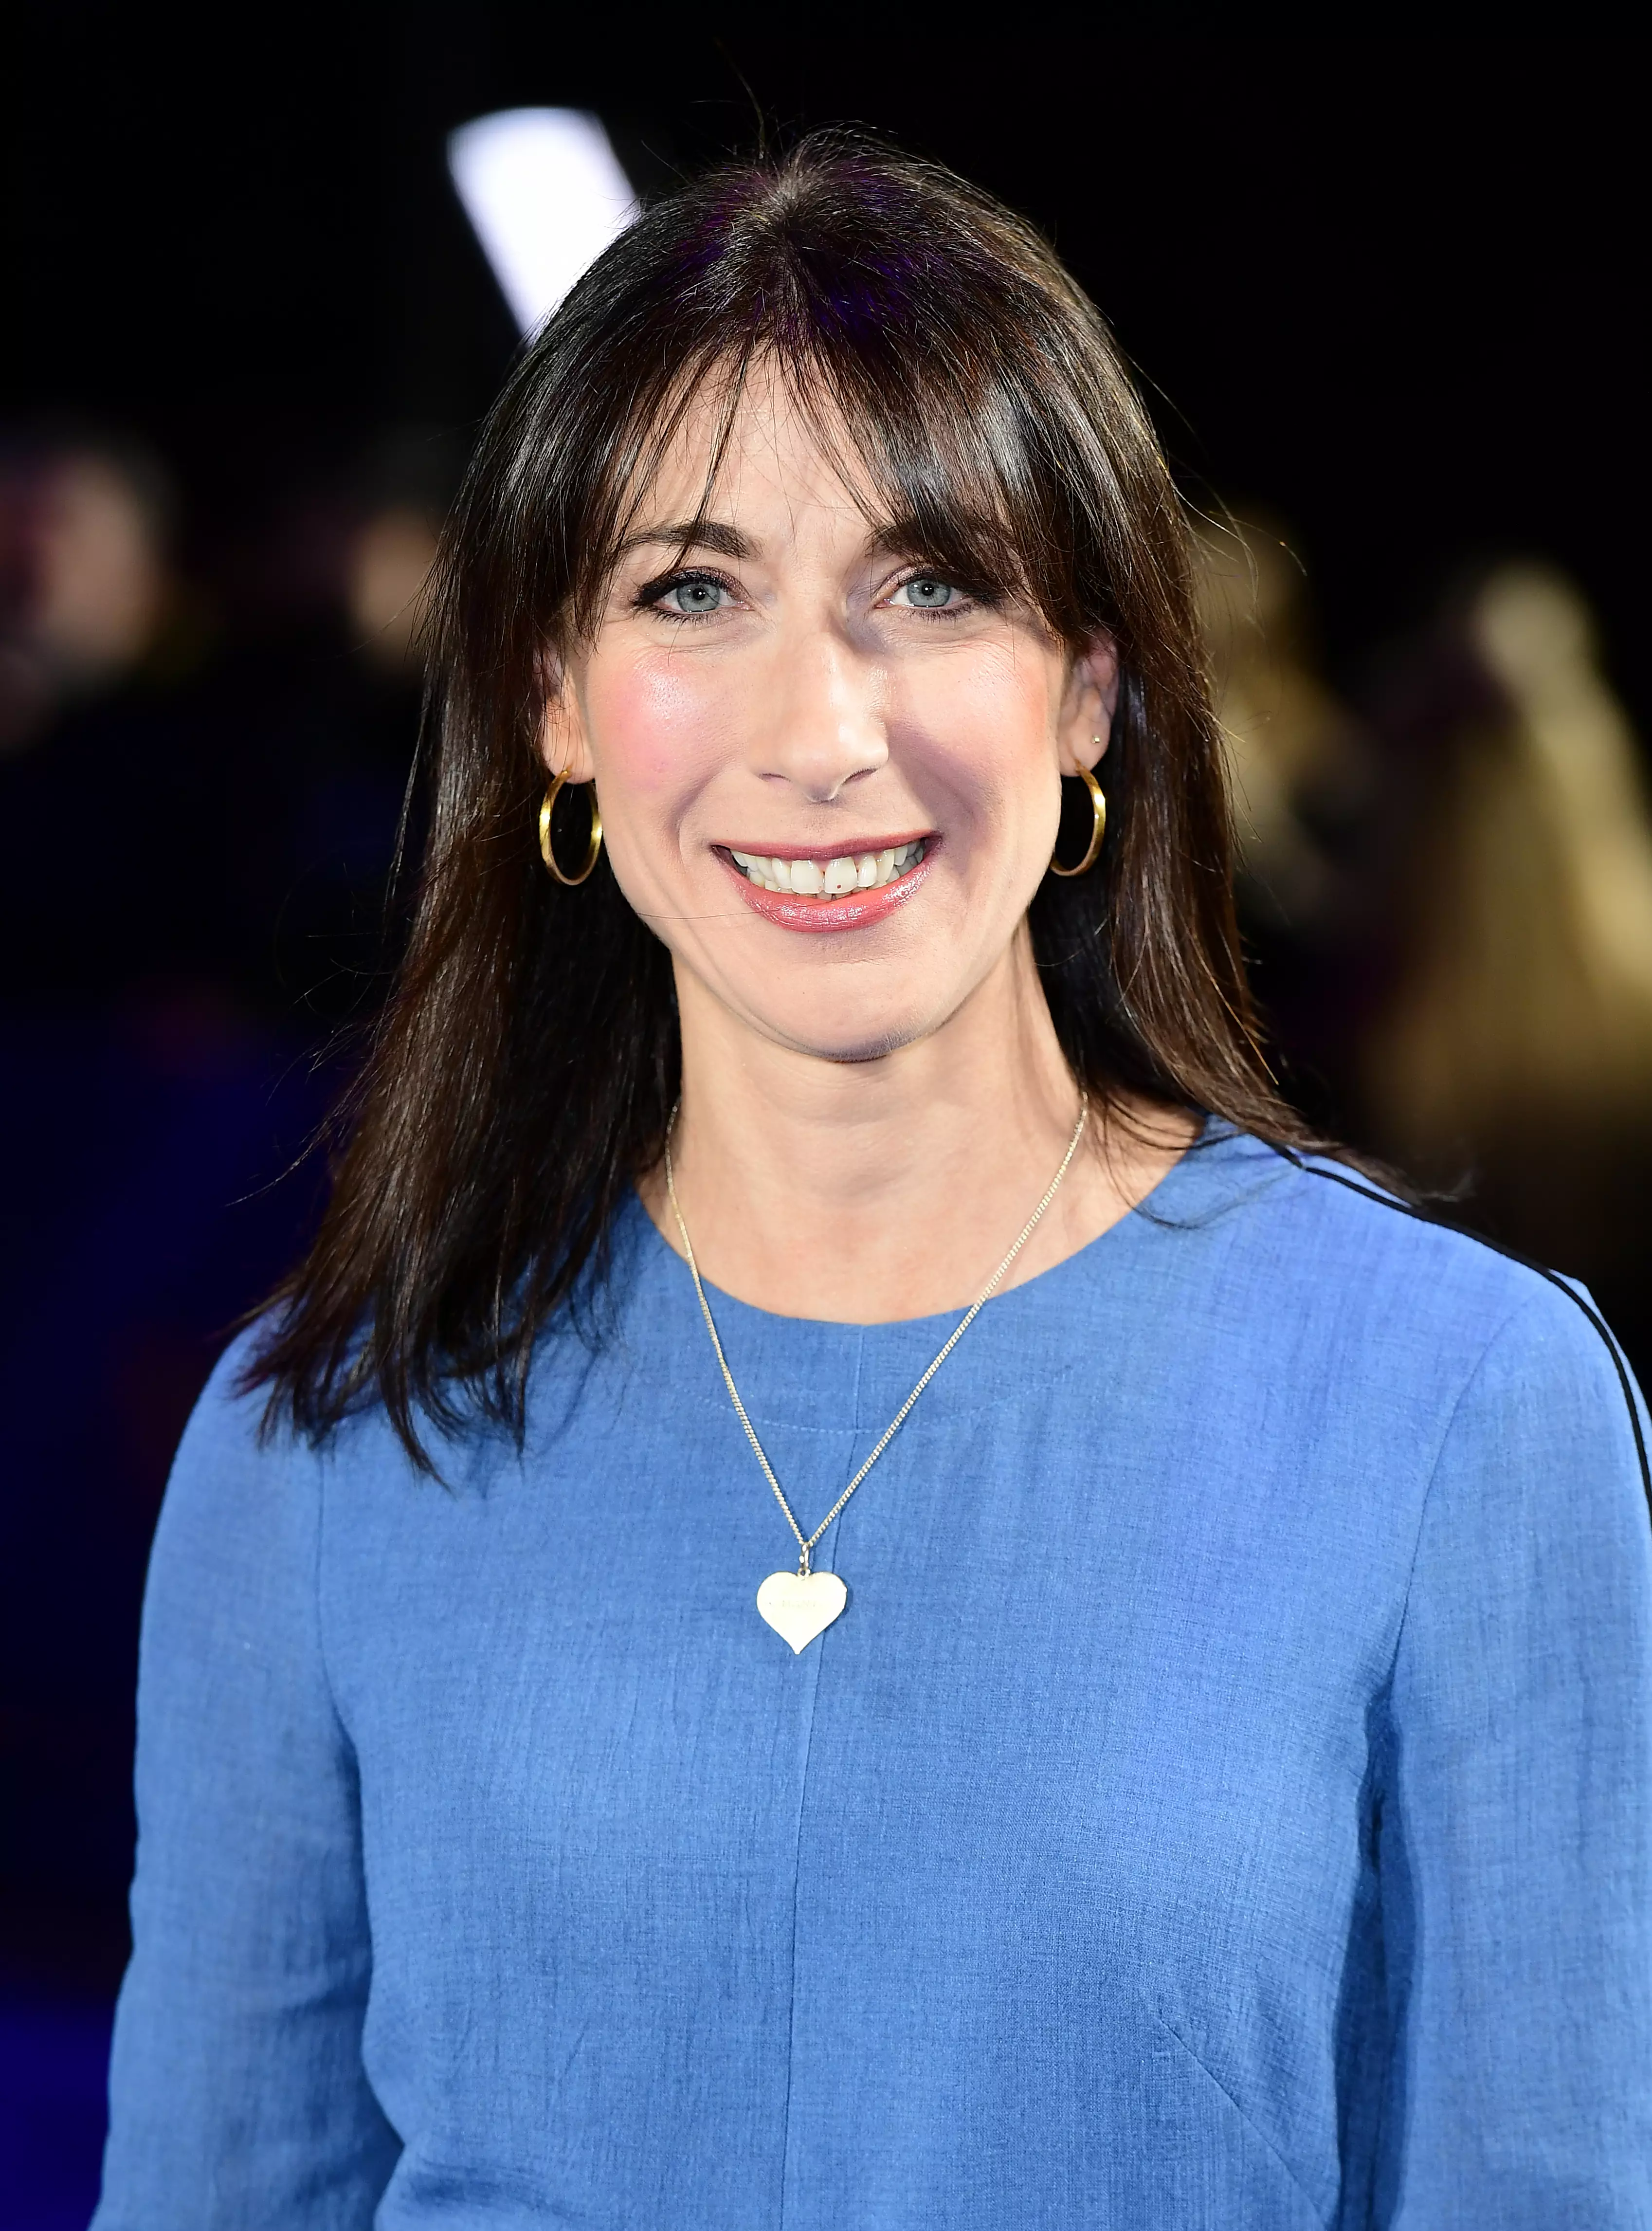 Samantha Cameron the wife of former Prime Minister David Cameron, attended the school.